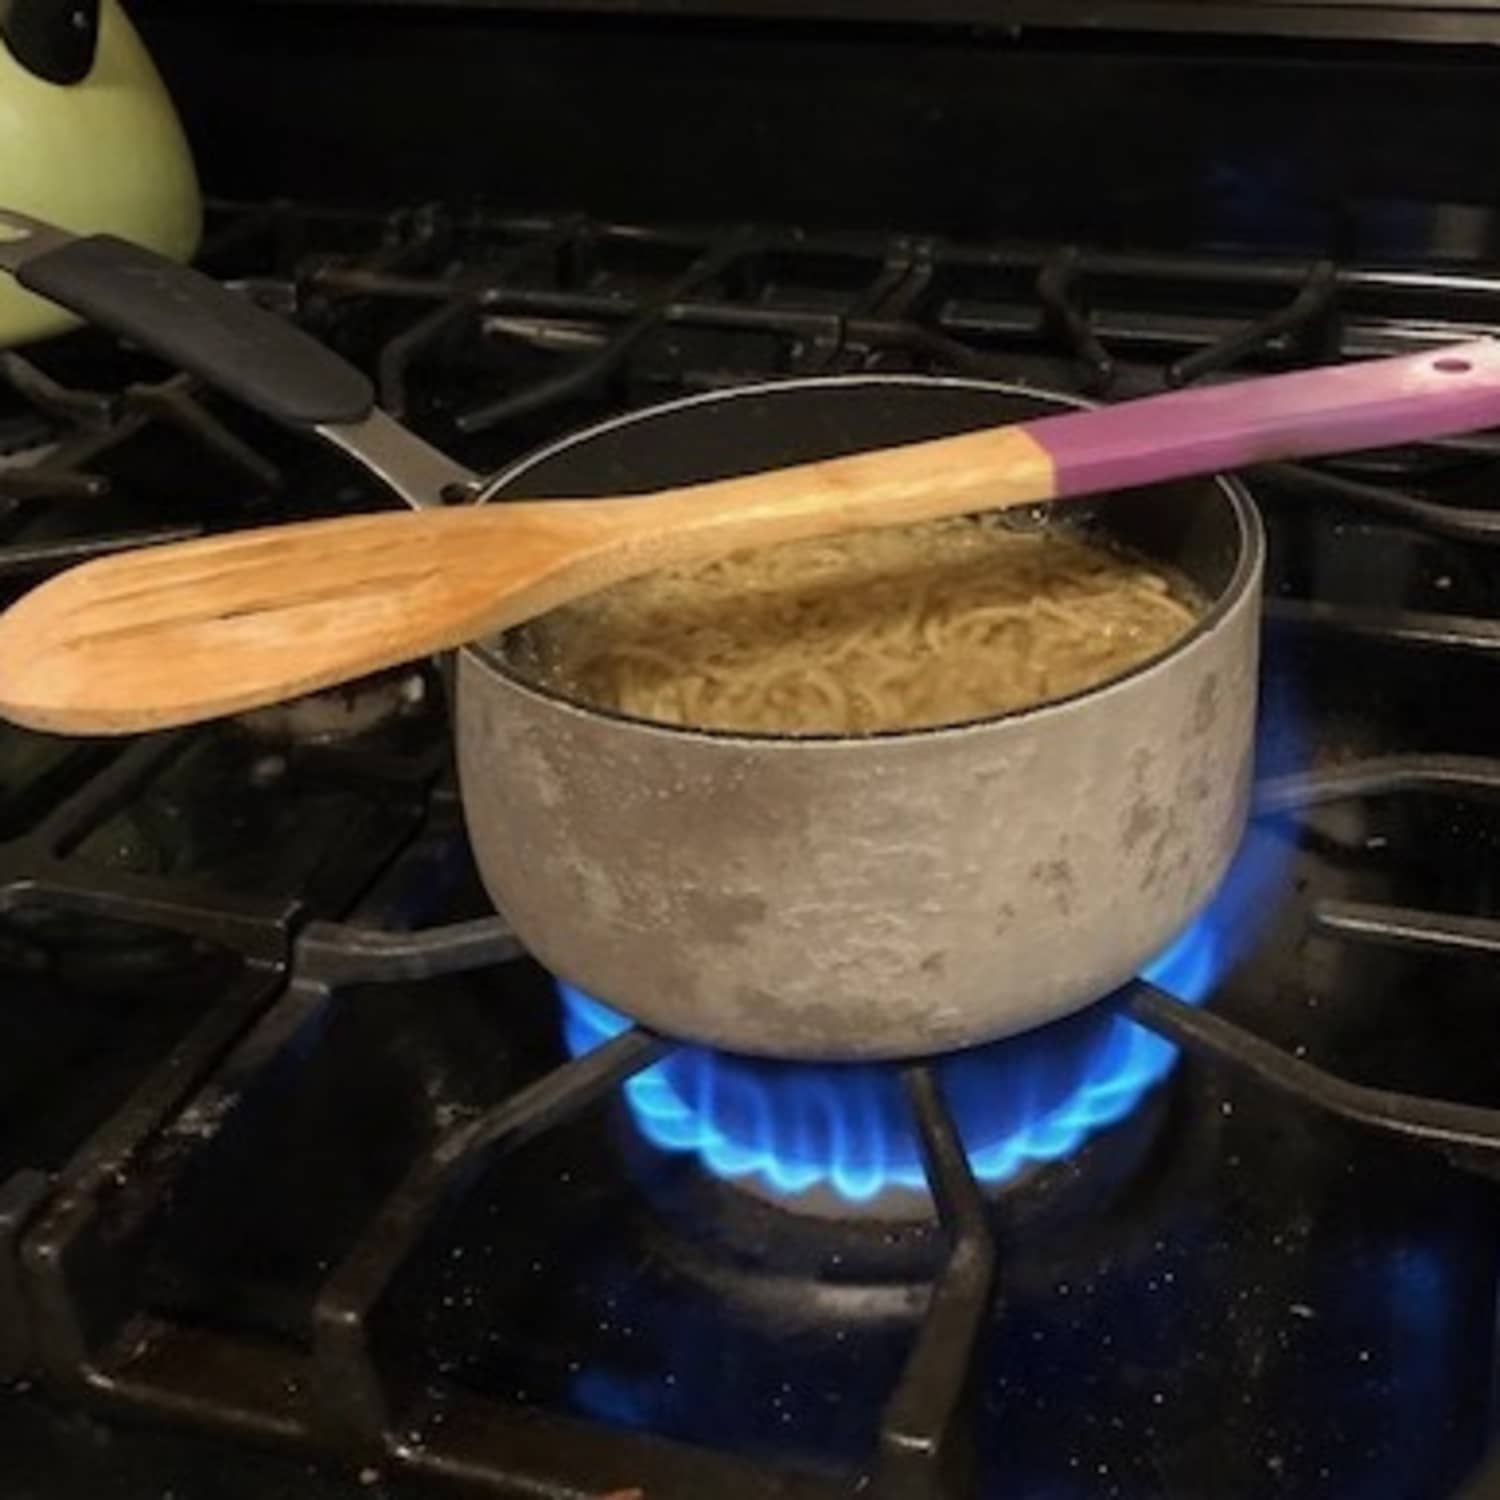 Why Does a Wooden Spoon Stop Water From Boiling Over?